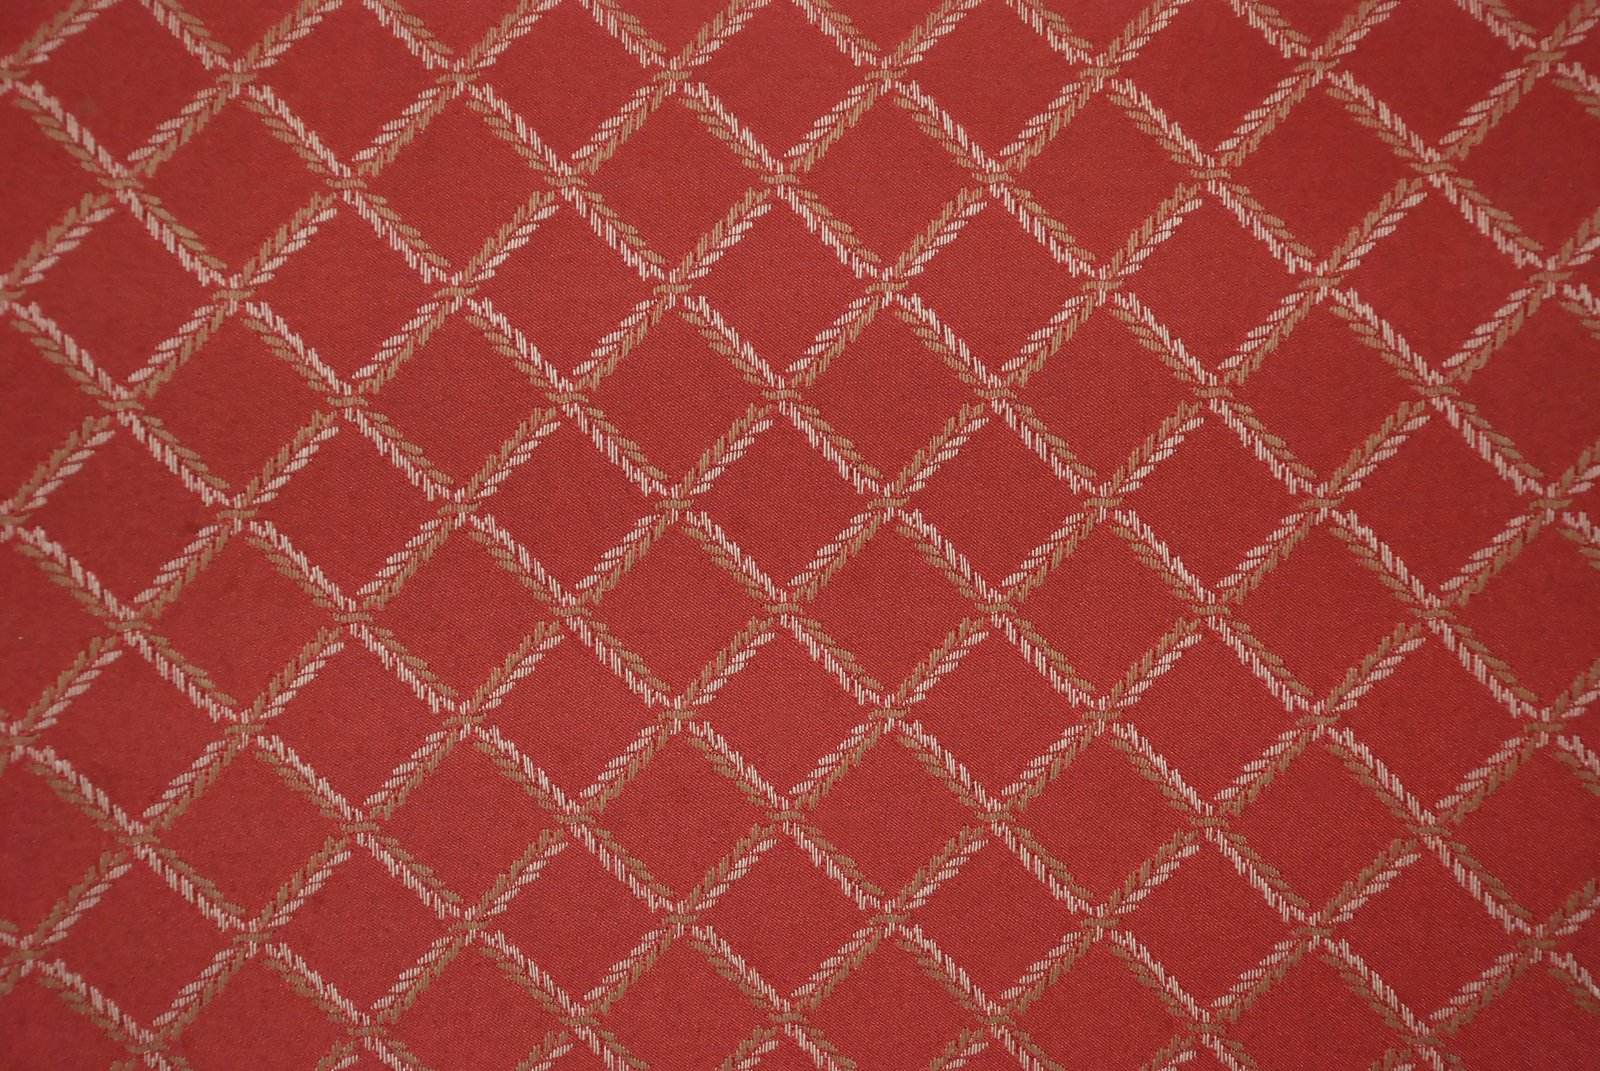 red cloth with white stitches, ornament background